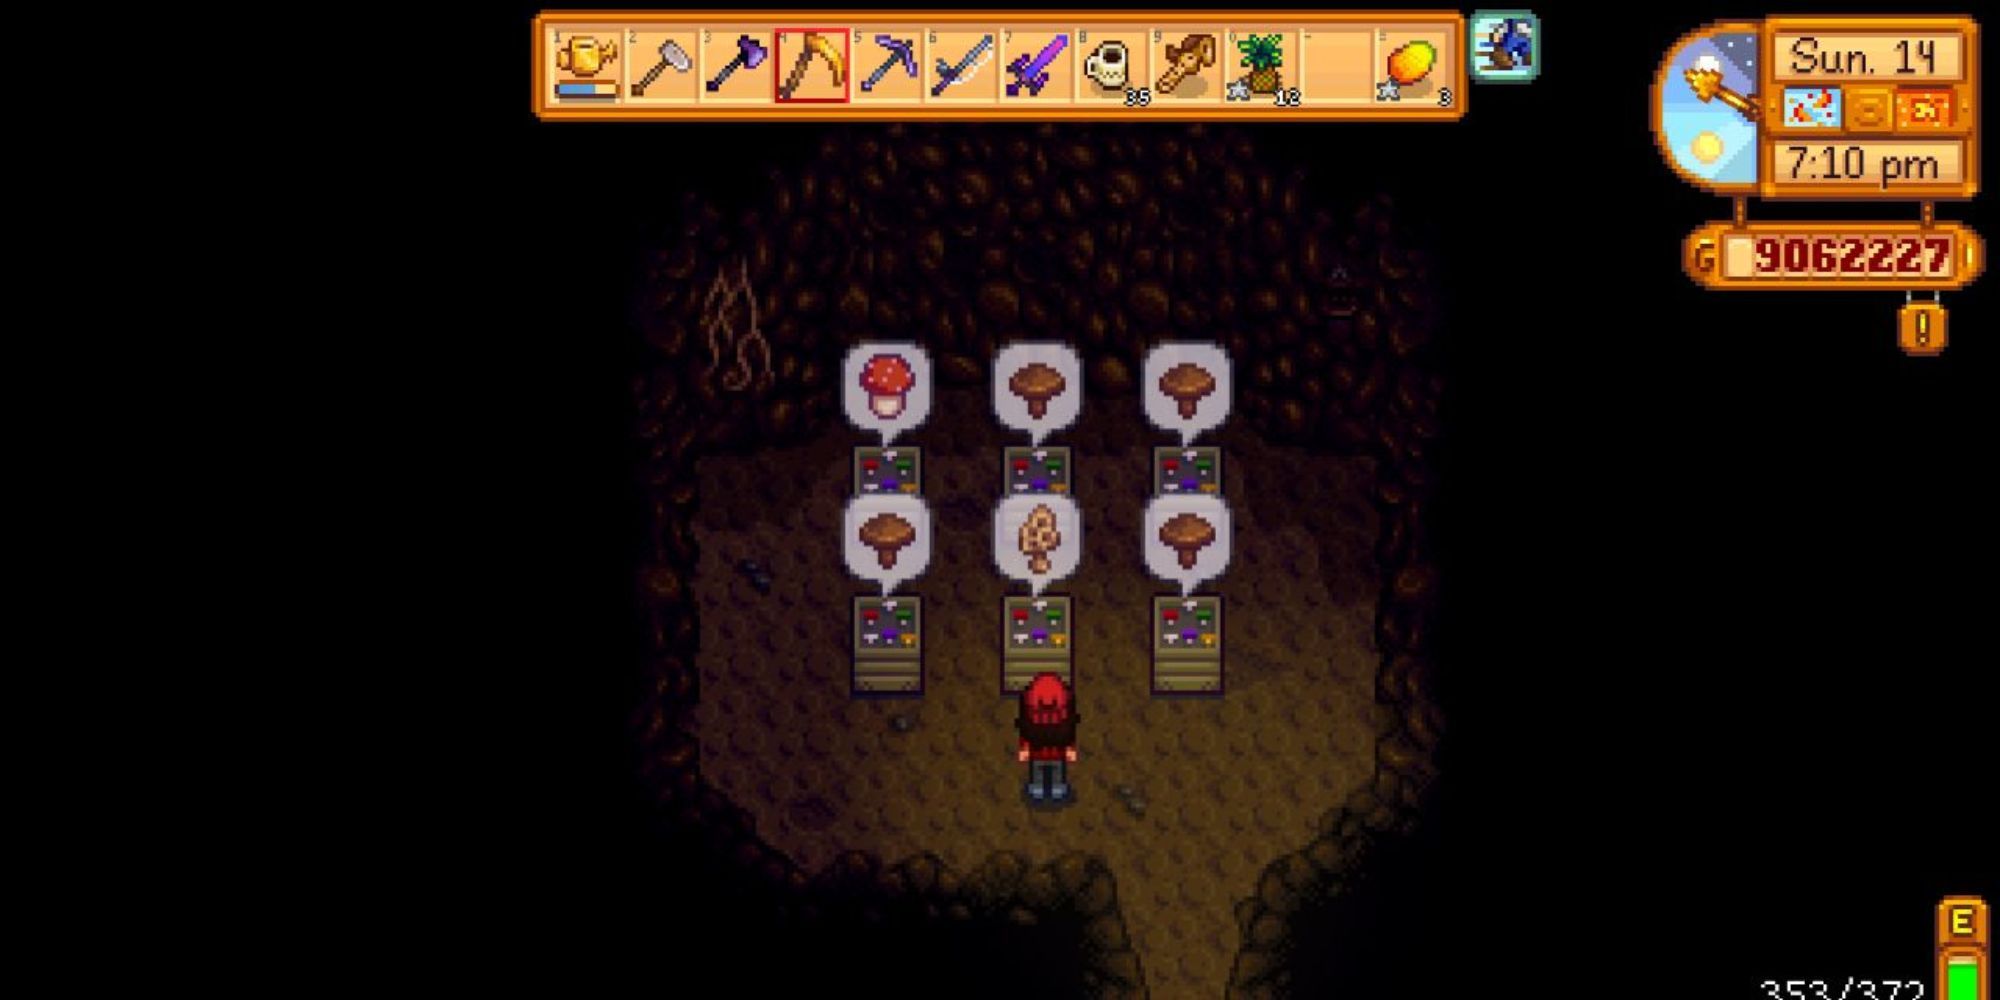 A mushroom cave in Stardew Valley